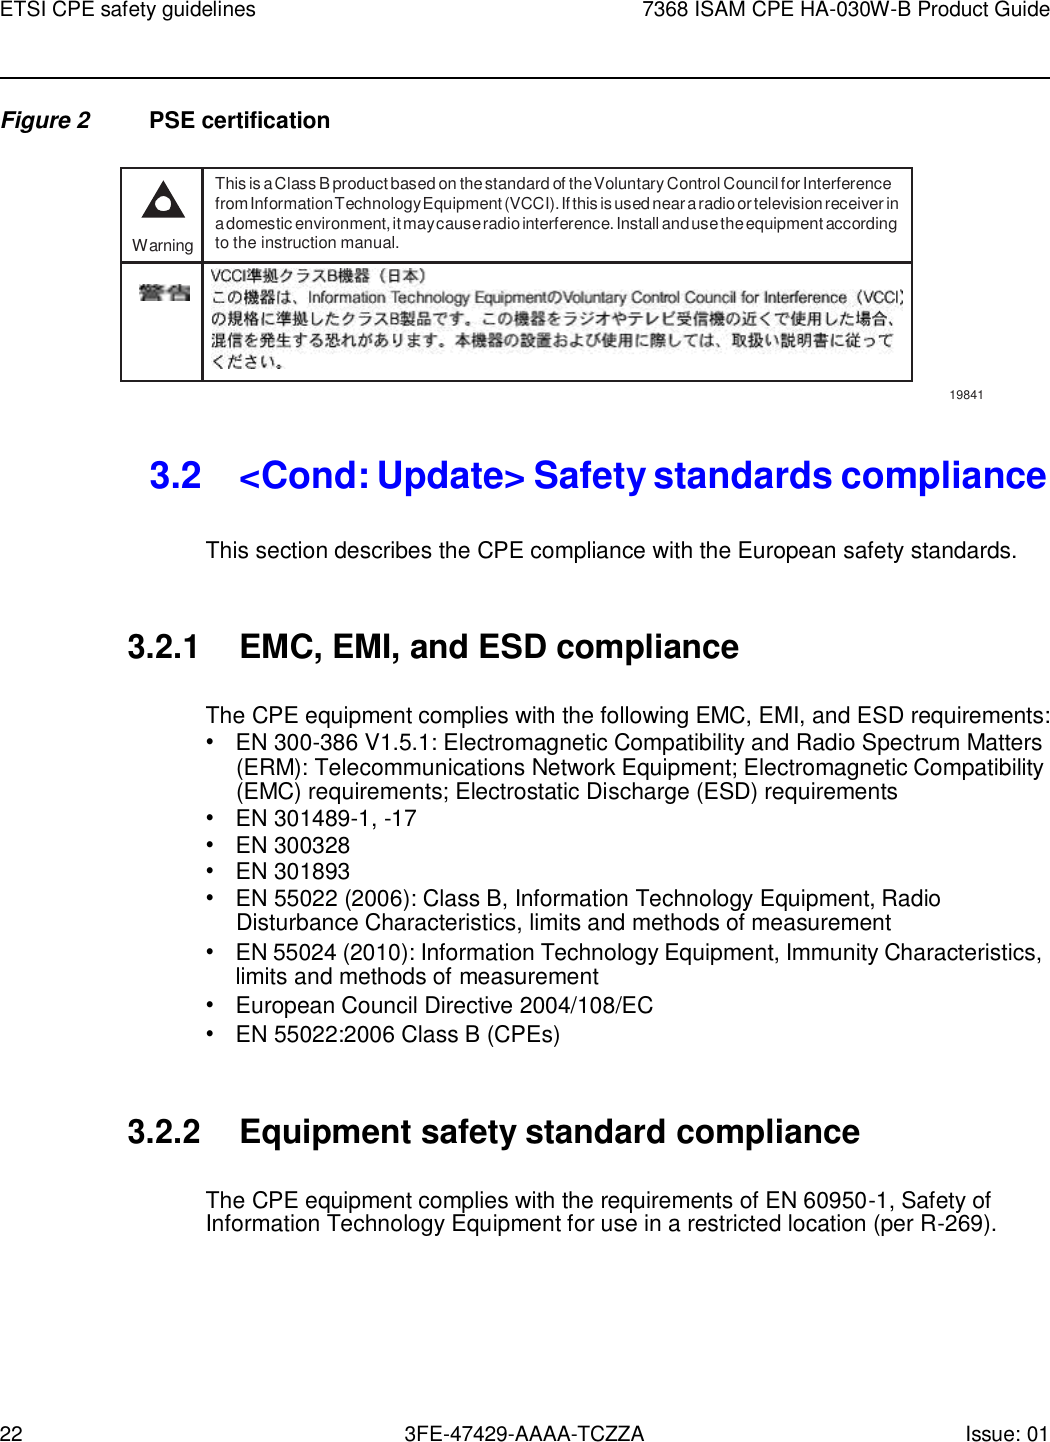 22 3FE-47429-AAAA-TCZZA Issue: 01 ETSI CPE safety guidelines 7368 ISAM CPE HA-030W-B Product Guide    Figure 2  PSE certification     Warning This is a Class B product based on the standard of the Voluntary Control Council for Interference from Information Technology Equipment (VCCI). If this is used near a radio or television receiver in a domestic environment, it may cause radio interference. Install and use the equipment according to the instruction manual.                      19841   3.2  &lt;Cond: Update&gt; Safety standards compliance  This section describes the CPE compliance with the European safety standards.   3.2.1 EMC, EMI, and ESD compliance  The CPE equipment complies with the following EMC, EMI, and ESD requirements: • EN 300-386 V1.5.1: Electromagnetic Compatibility and Radio Spectrum Matters (ERM): Telecommunications Network Equipment; Electromagnetic Compatibility (EMC) requirements; Electrostatic Discharge (ESD) requirements • EN 301489-1, -17 • EN 300328 • EN 301893 • EN 55022 (2006): Class B, Information Technology Equipment, Radio Disturbance Characteristics, limits and methods of measurement • EN 55024 (2010): Information Technology Equipment, Immunity Characteristics, limits and methods of measurement • European Council Directive 2004/108/EC • EN 55022:2006 Class B (CPEs)   3.2.2 Equipment safety standard compliance  The CPE equipment complies with the requirements of EN 60950-1, Safety of Information Technology Equipment for use in a restricted location (per R-269). 